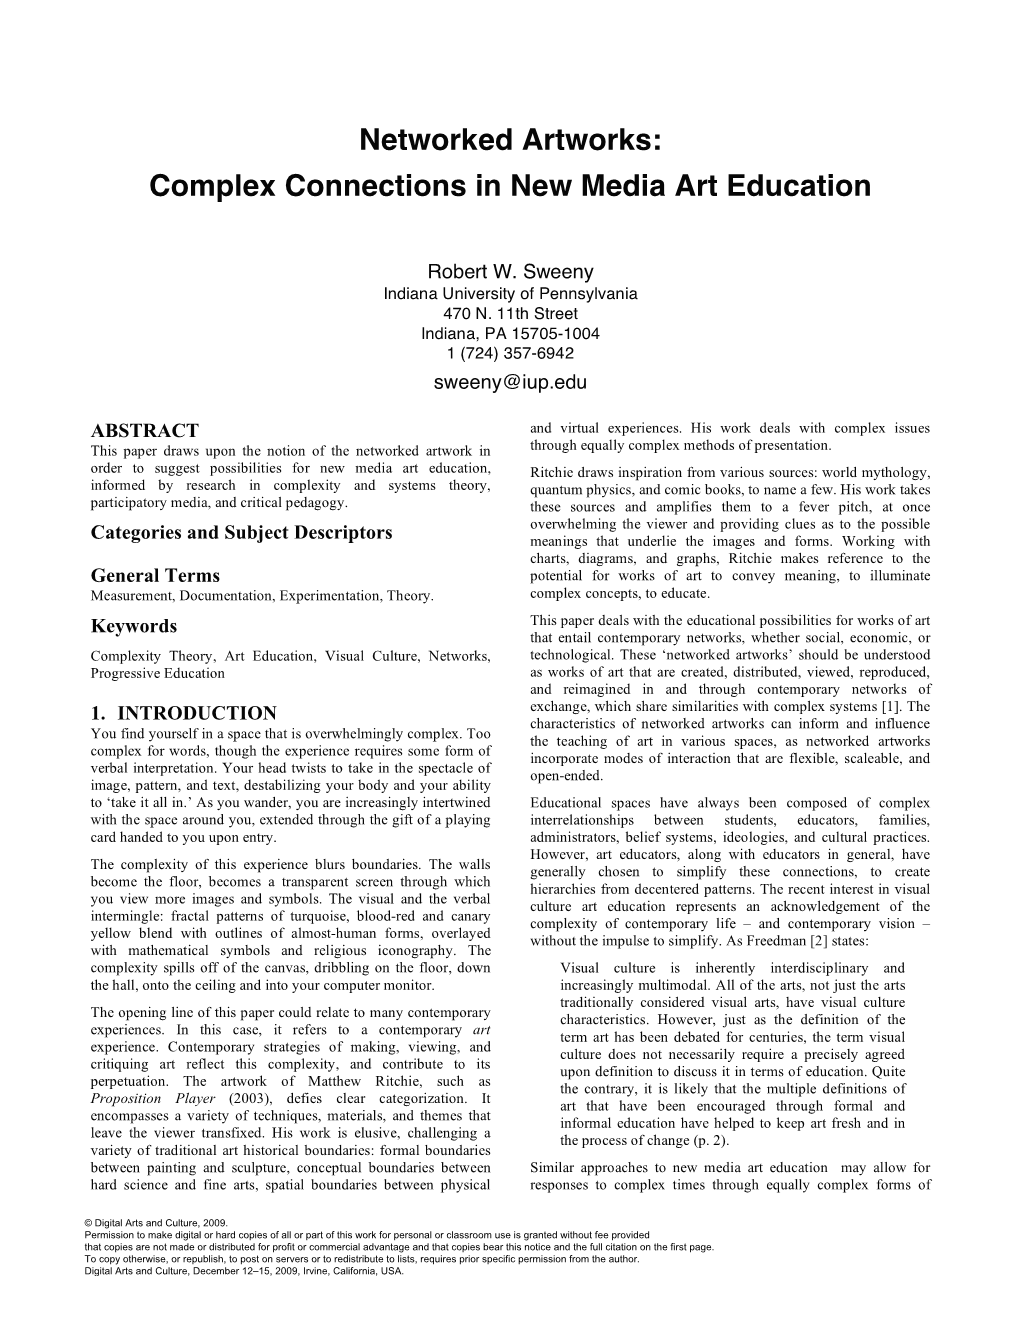 Networked Artworks: Complex Connections in New Media Art Education